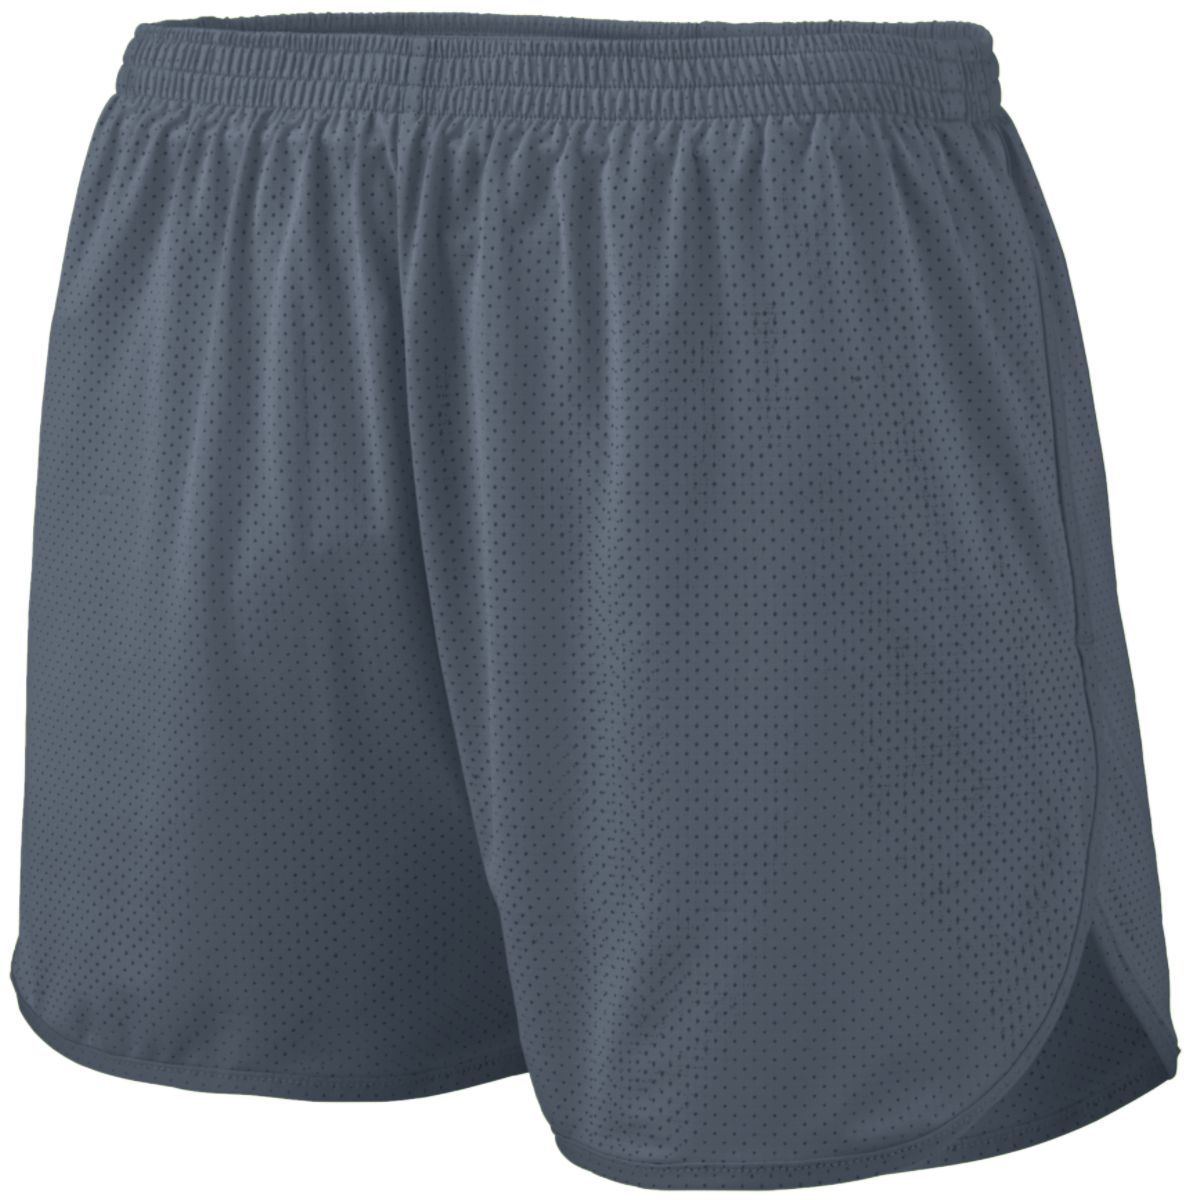 Augusta Sportswear Solid Split Shorts in Graphite  -Part of the Adult, Adult-Shorts, Augusta-Products, Track-Field product lines at KanaleyCreations.com